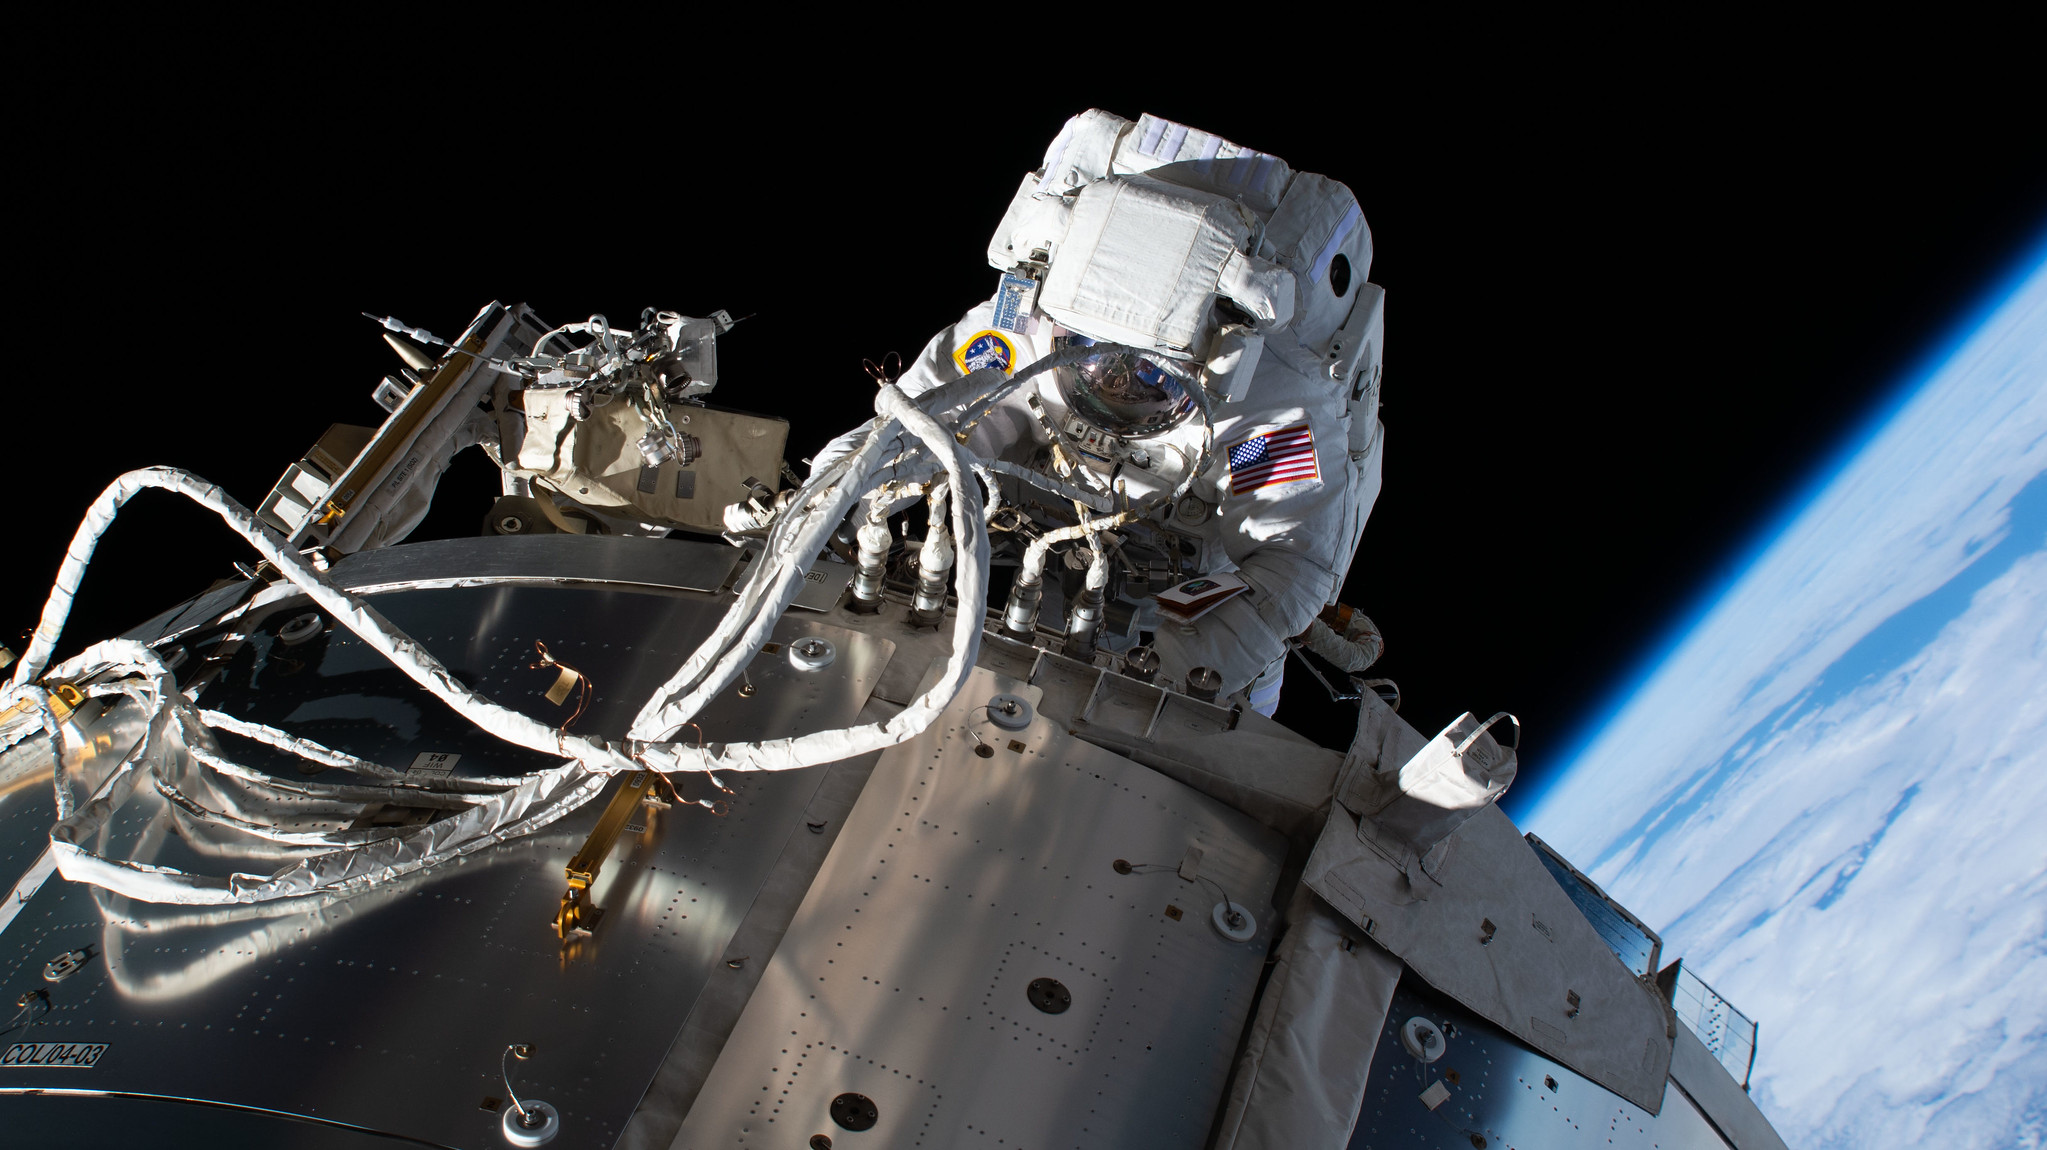 NASA astronaut and Expedition 64 Flight Engineer Michael Hopkins is pictured during a spacewalk servicing communications gear on the outside of the International Space Station's Columbus laboratory module.